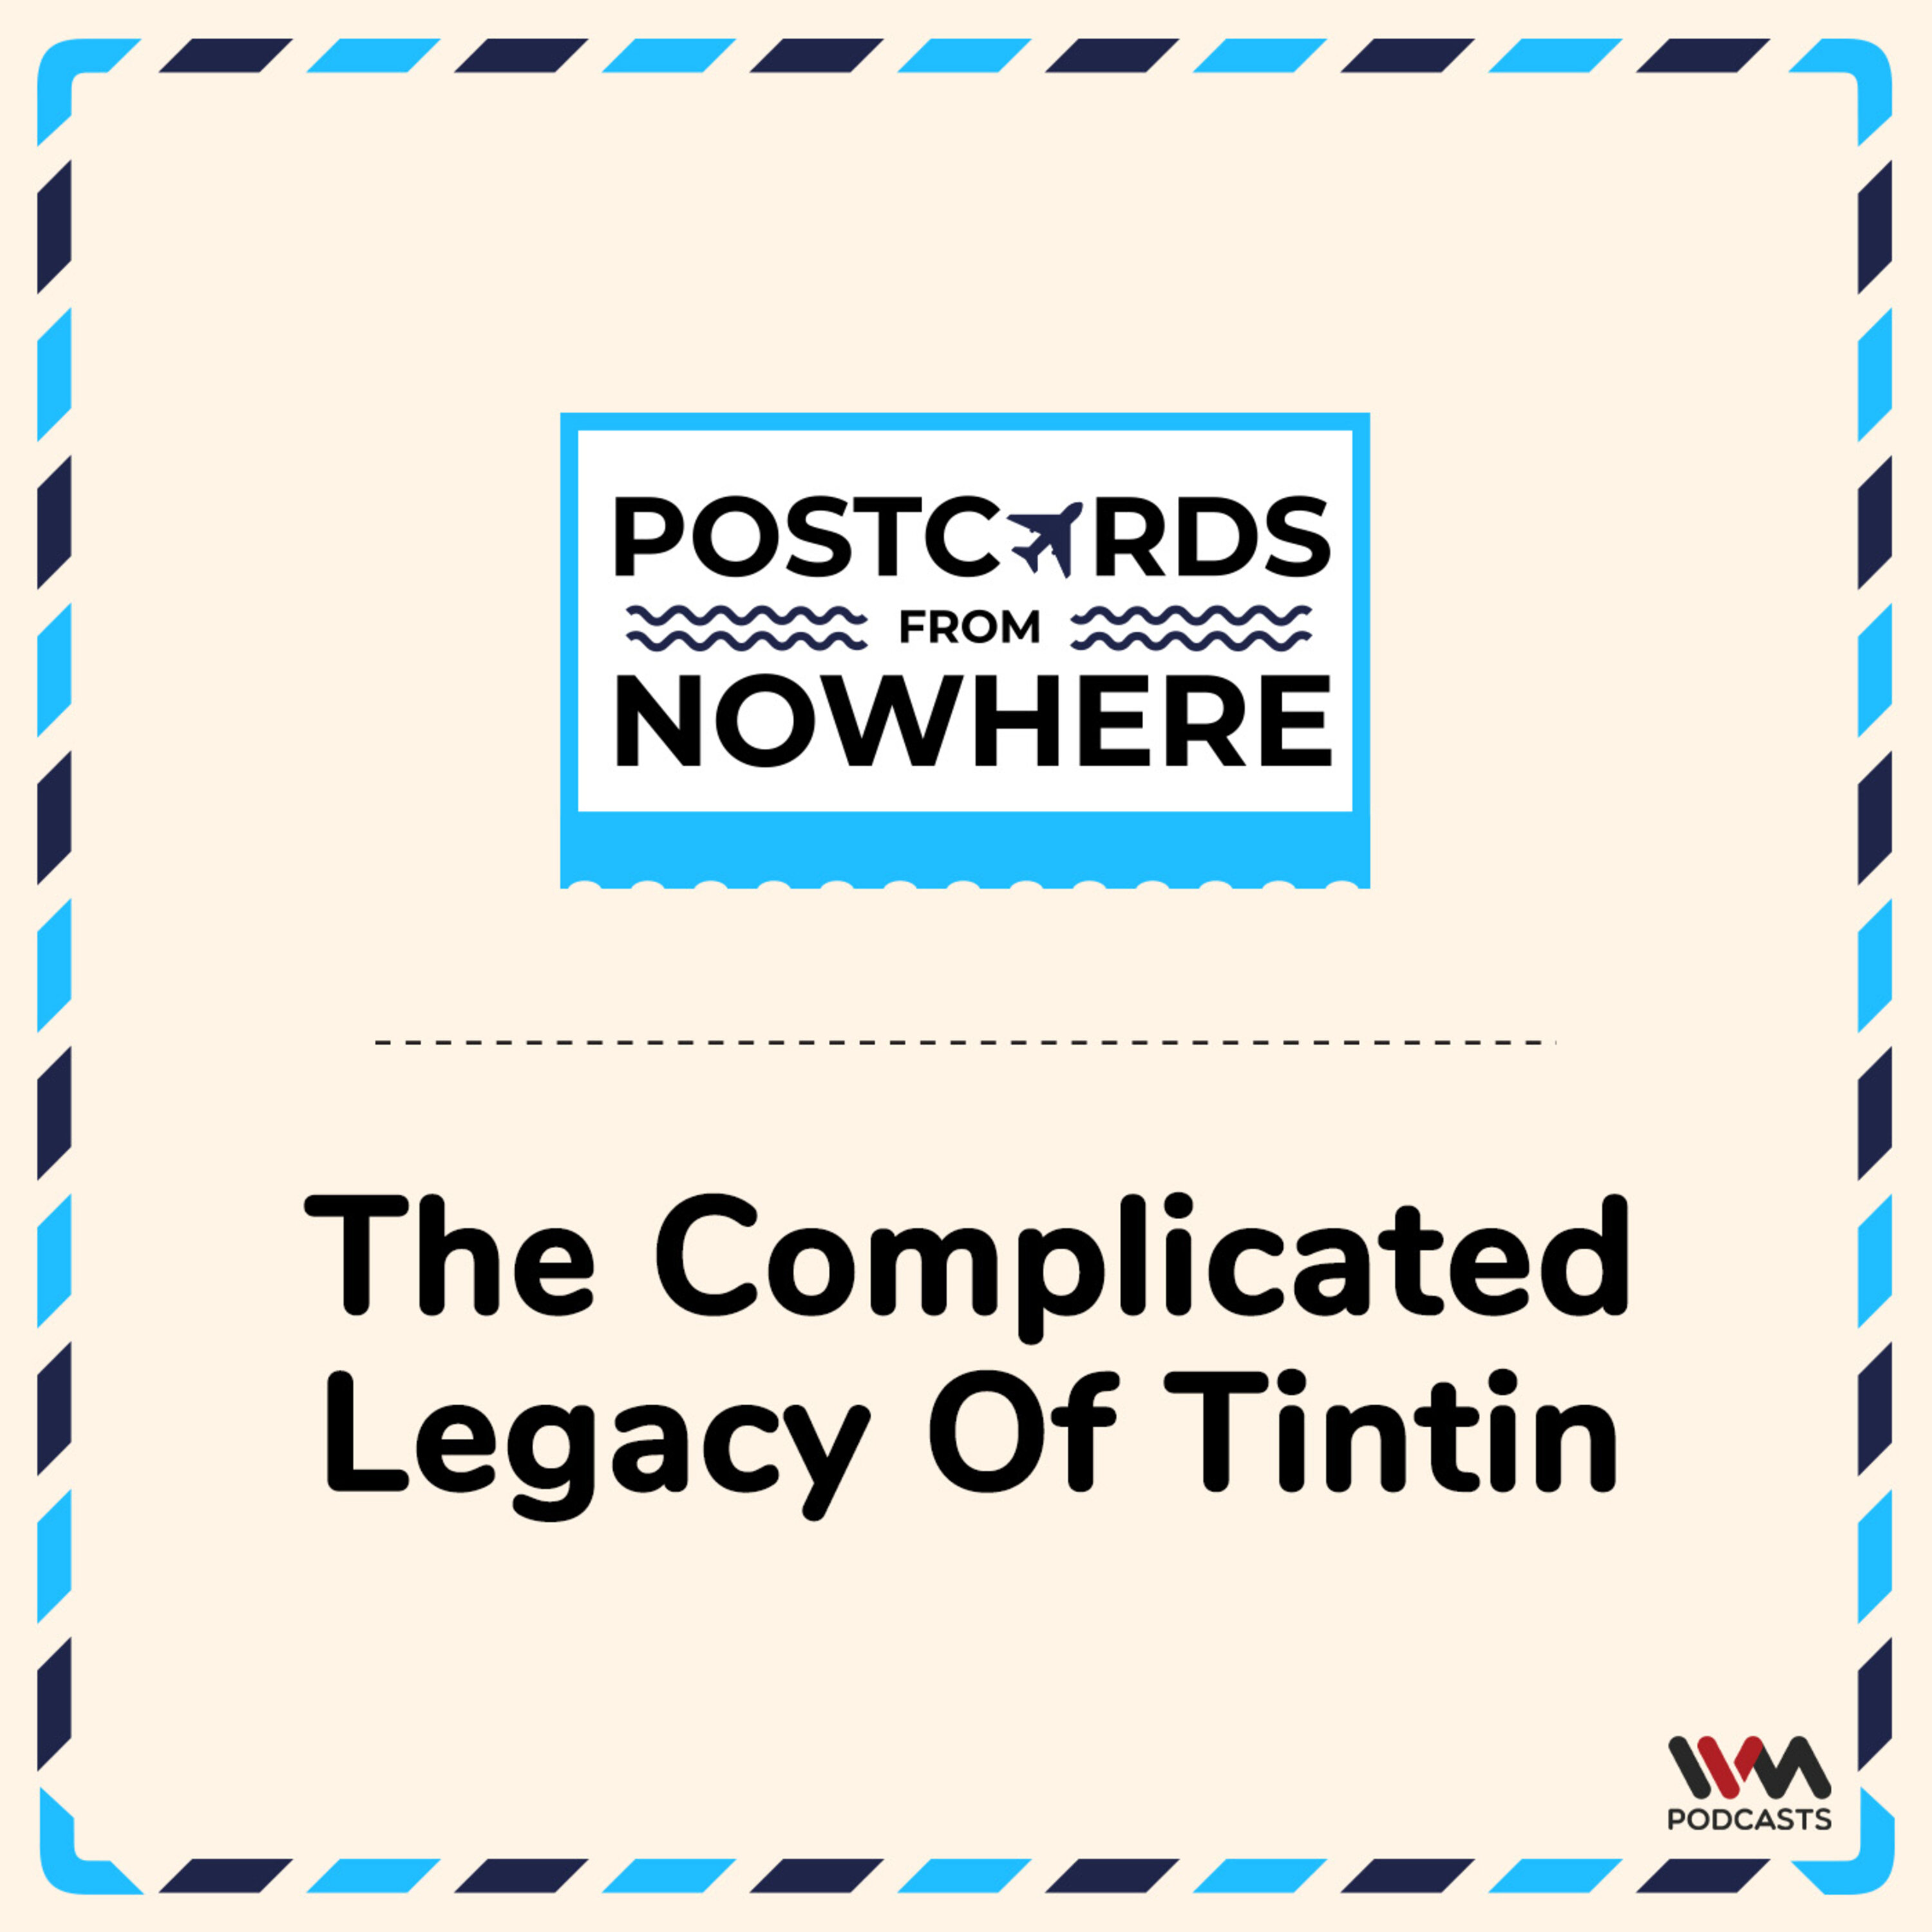 The Complicated Legacy of Tintin